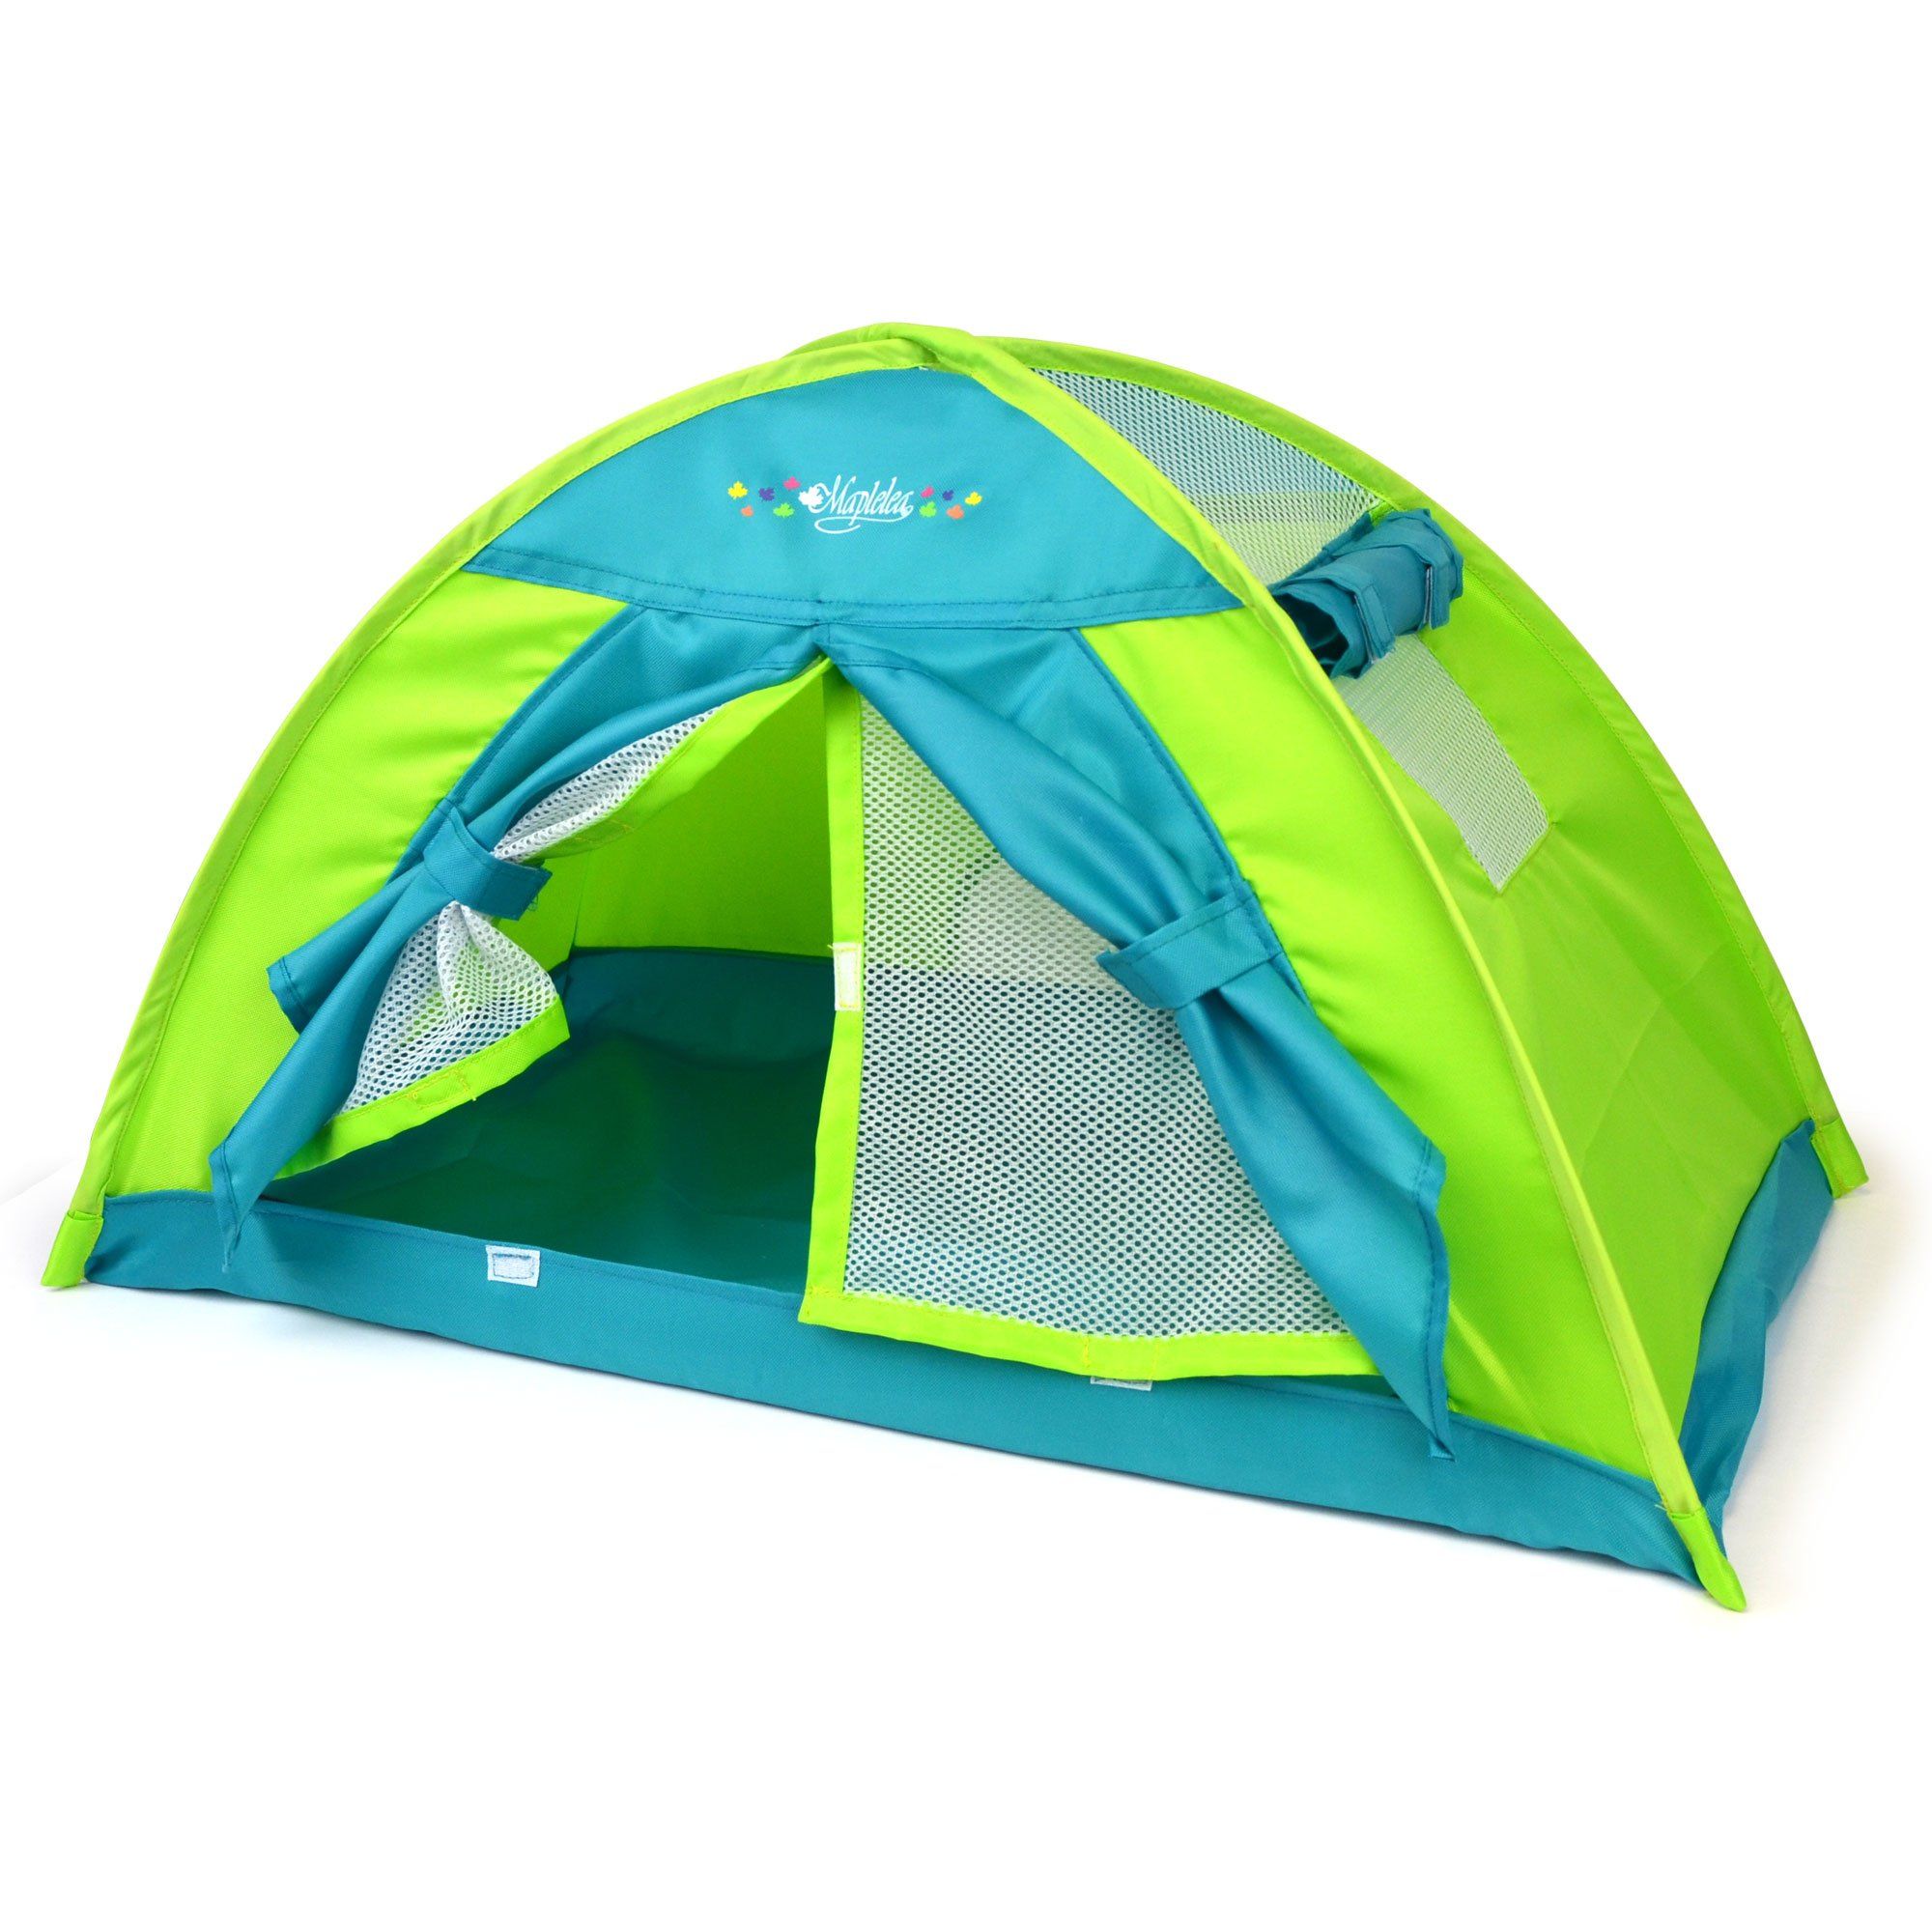 Colorful pop-up tent for 18 inch dolls accommodates all Maplelea Canadian Girl dolls' bedding or sleeping bags.